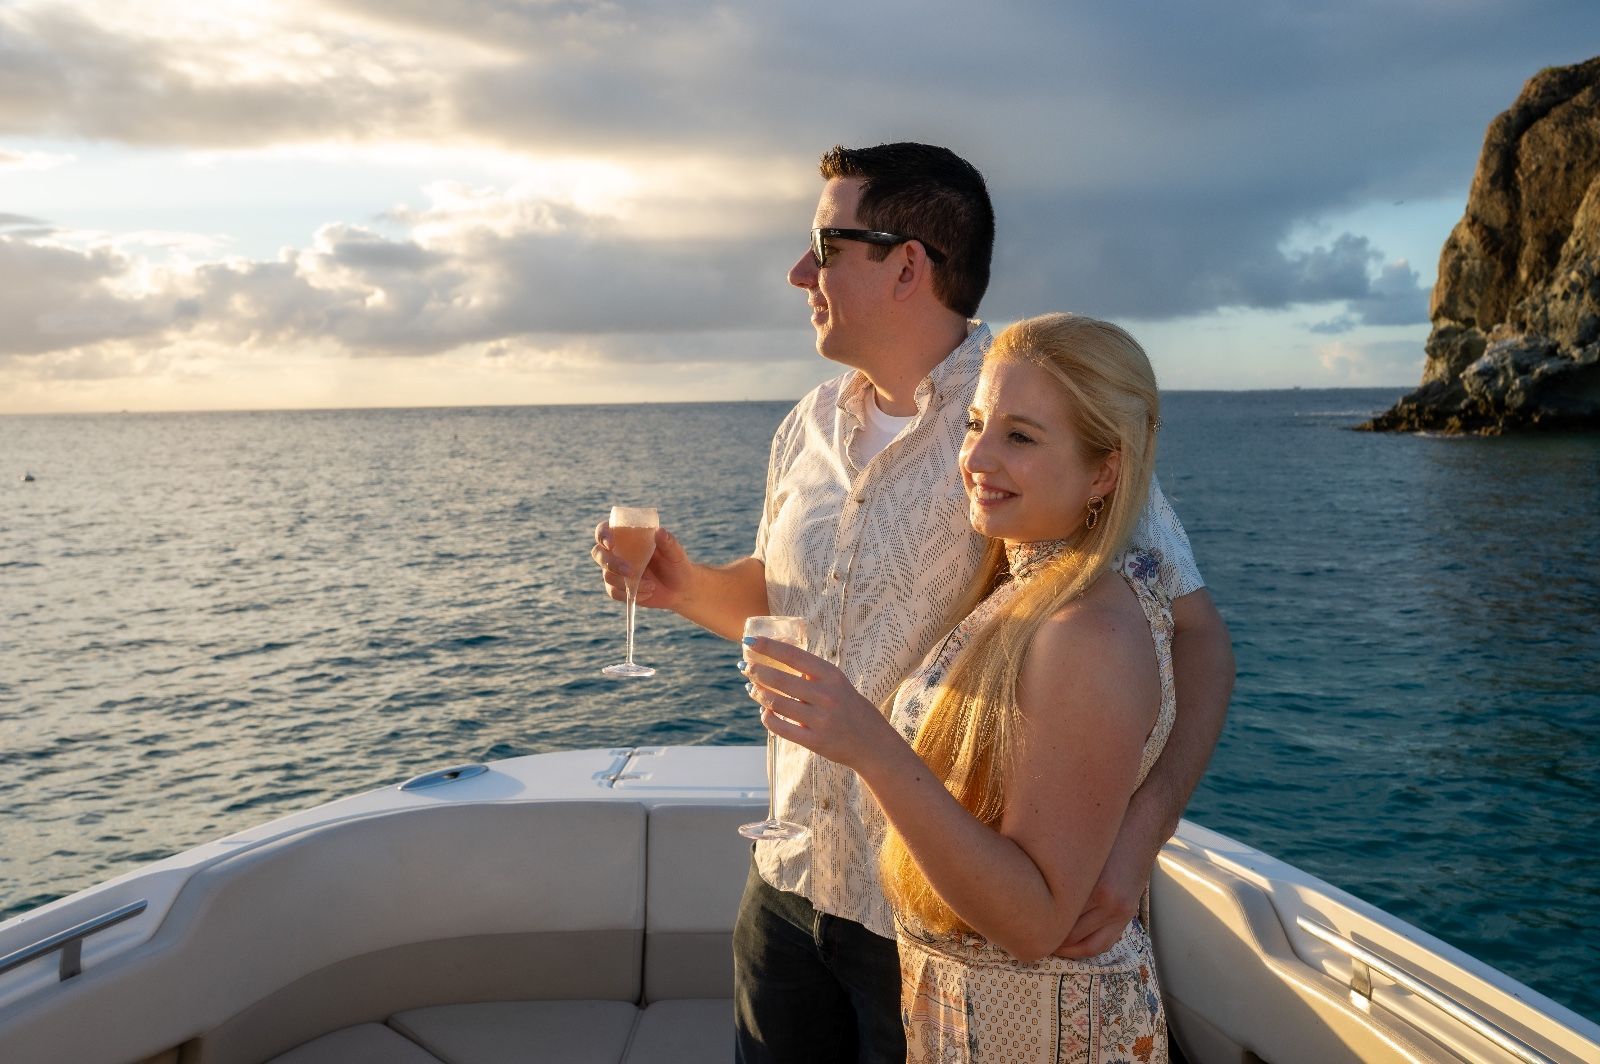 A man and a woman are standing on a boat in the ocean holding wine glasses.